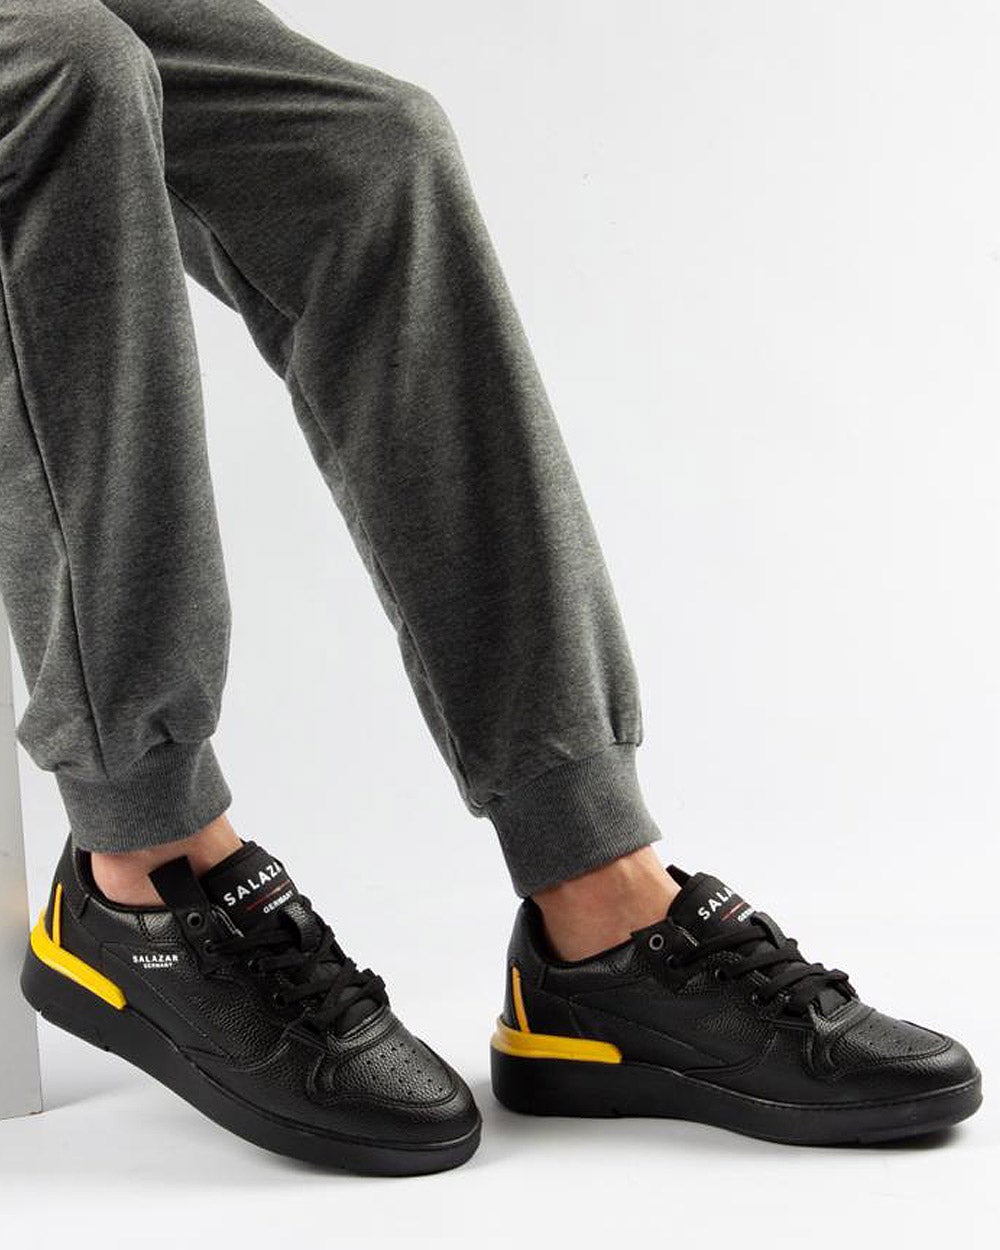 Shoes Black Trendy two-tone black yellow sneakers for men with black sole